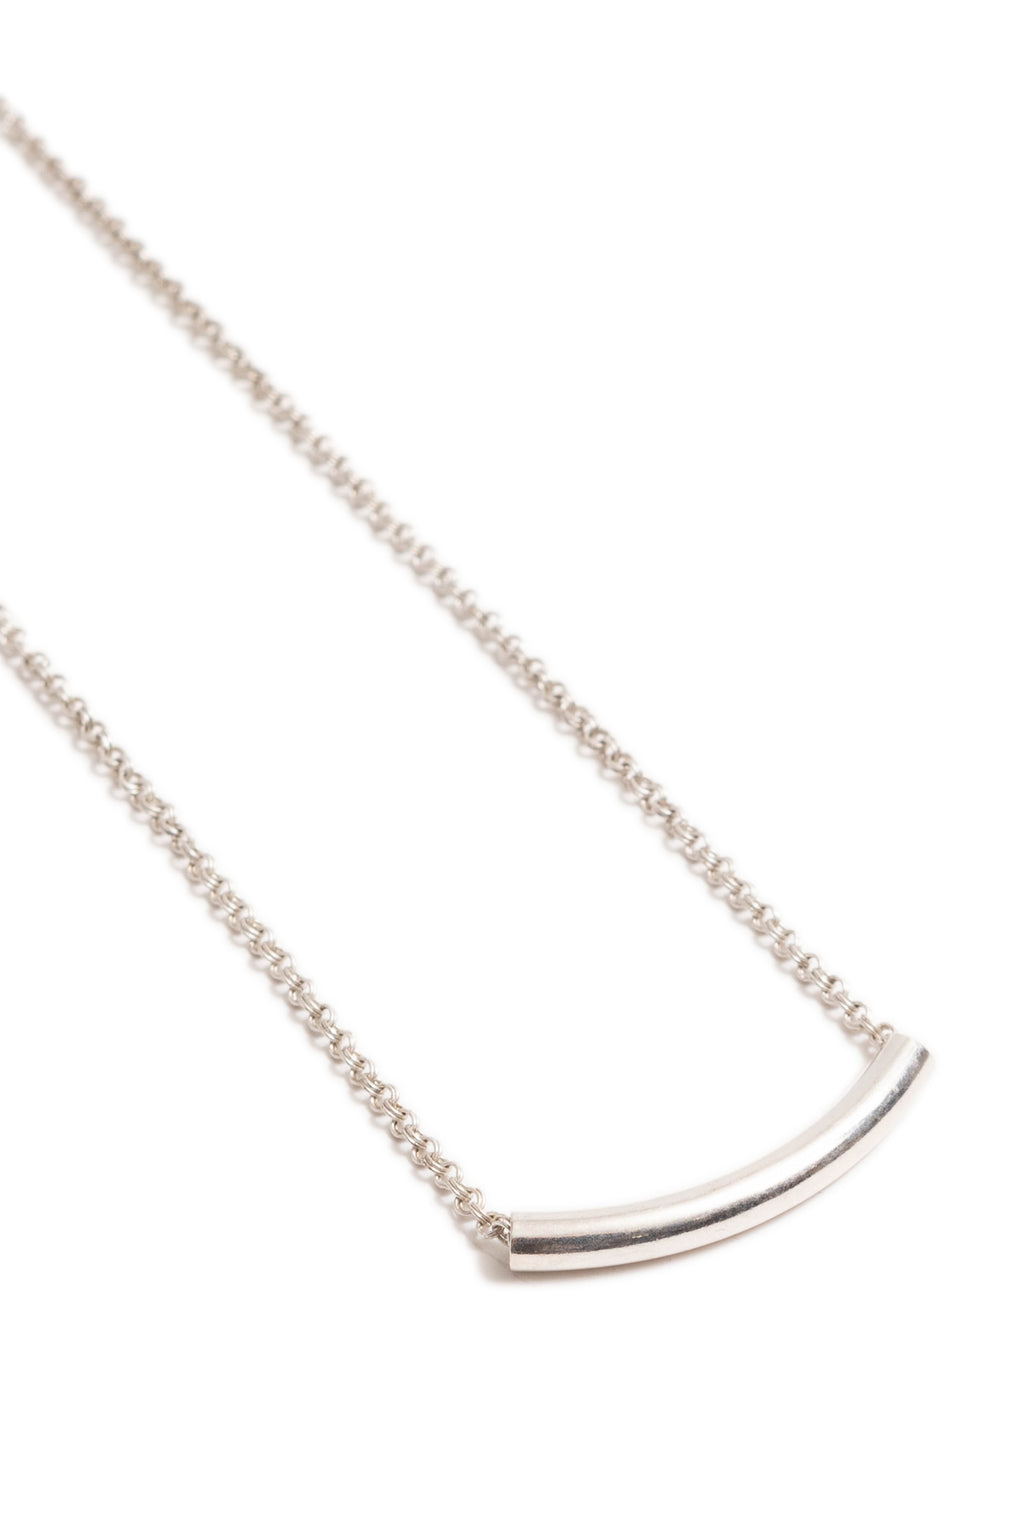 Small Silver Curve Bar Necklace